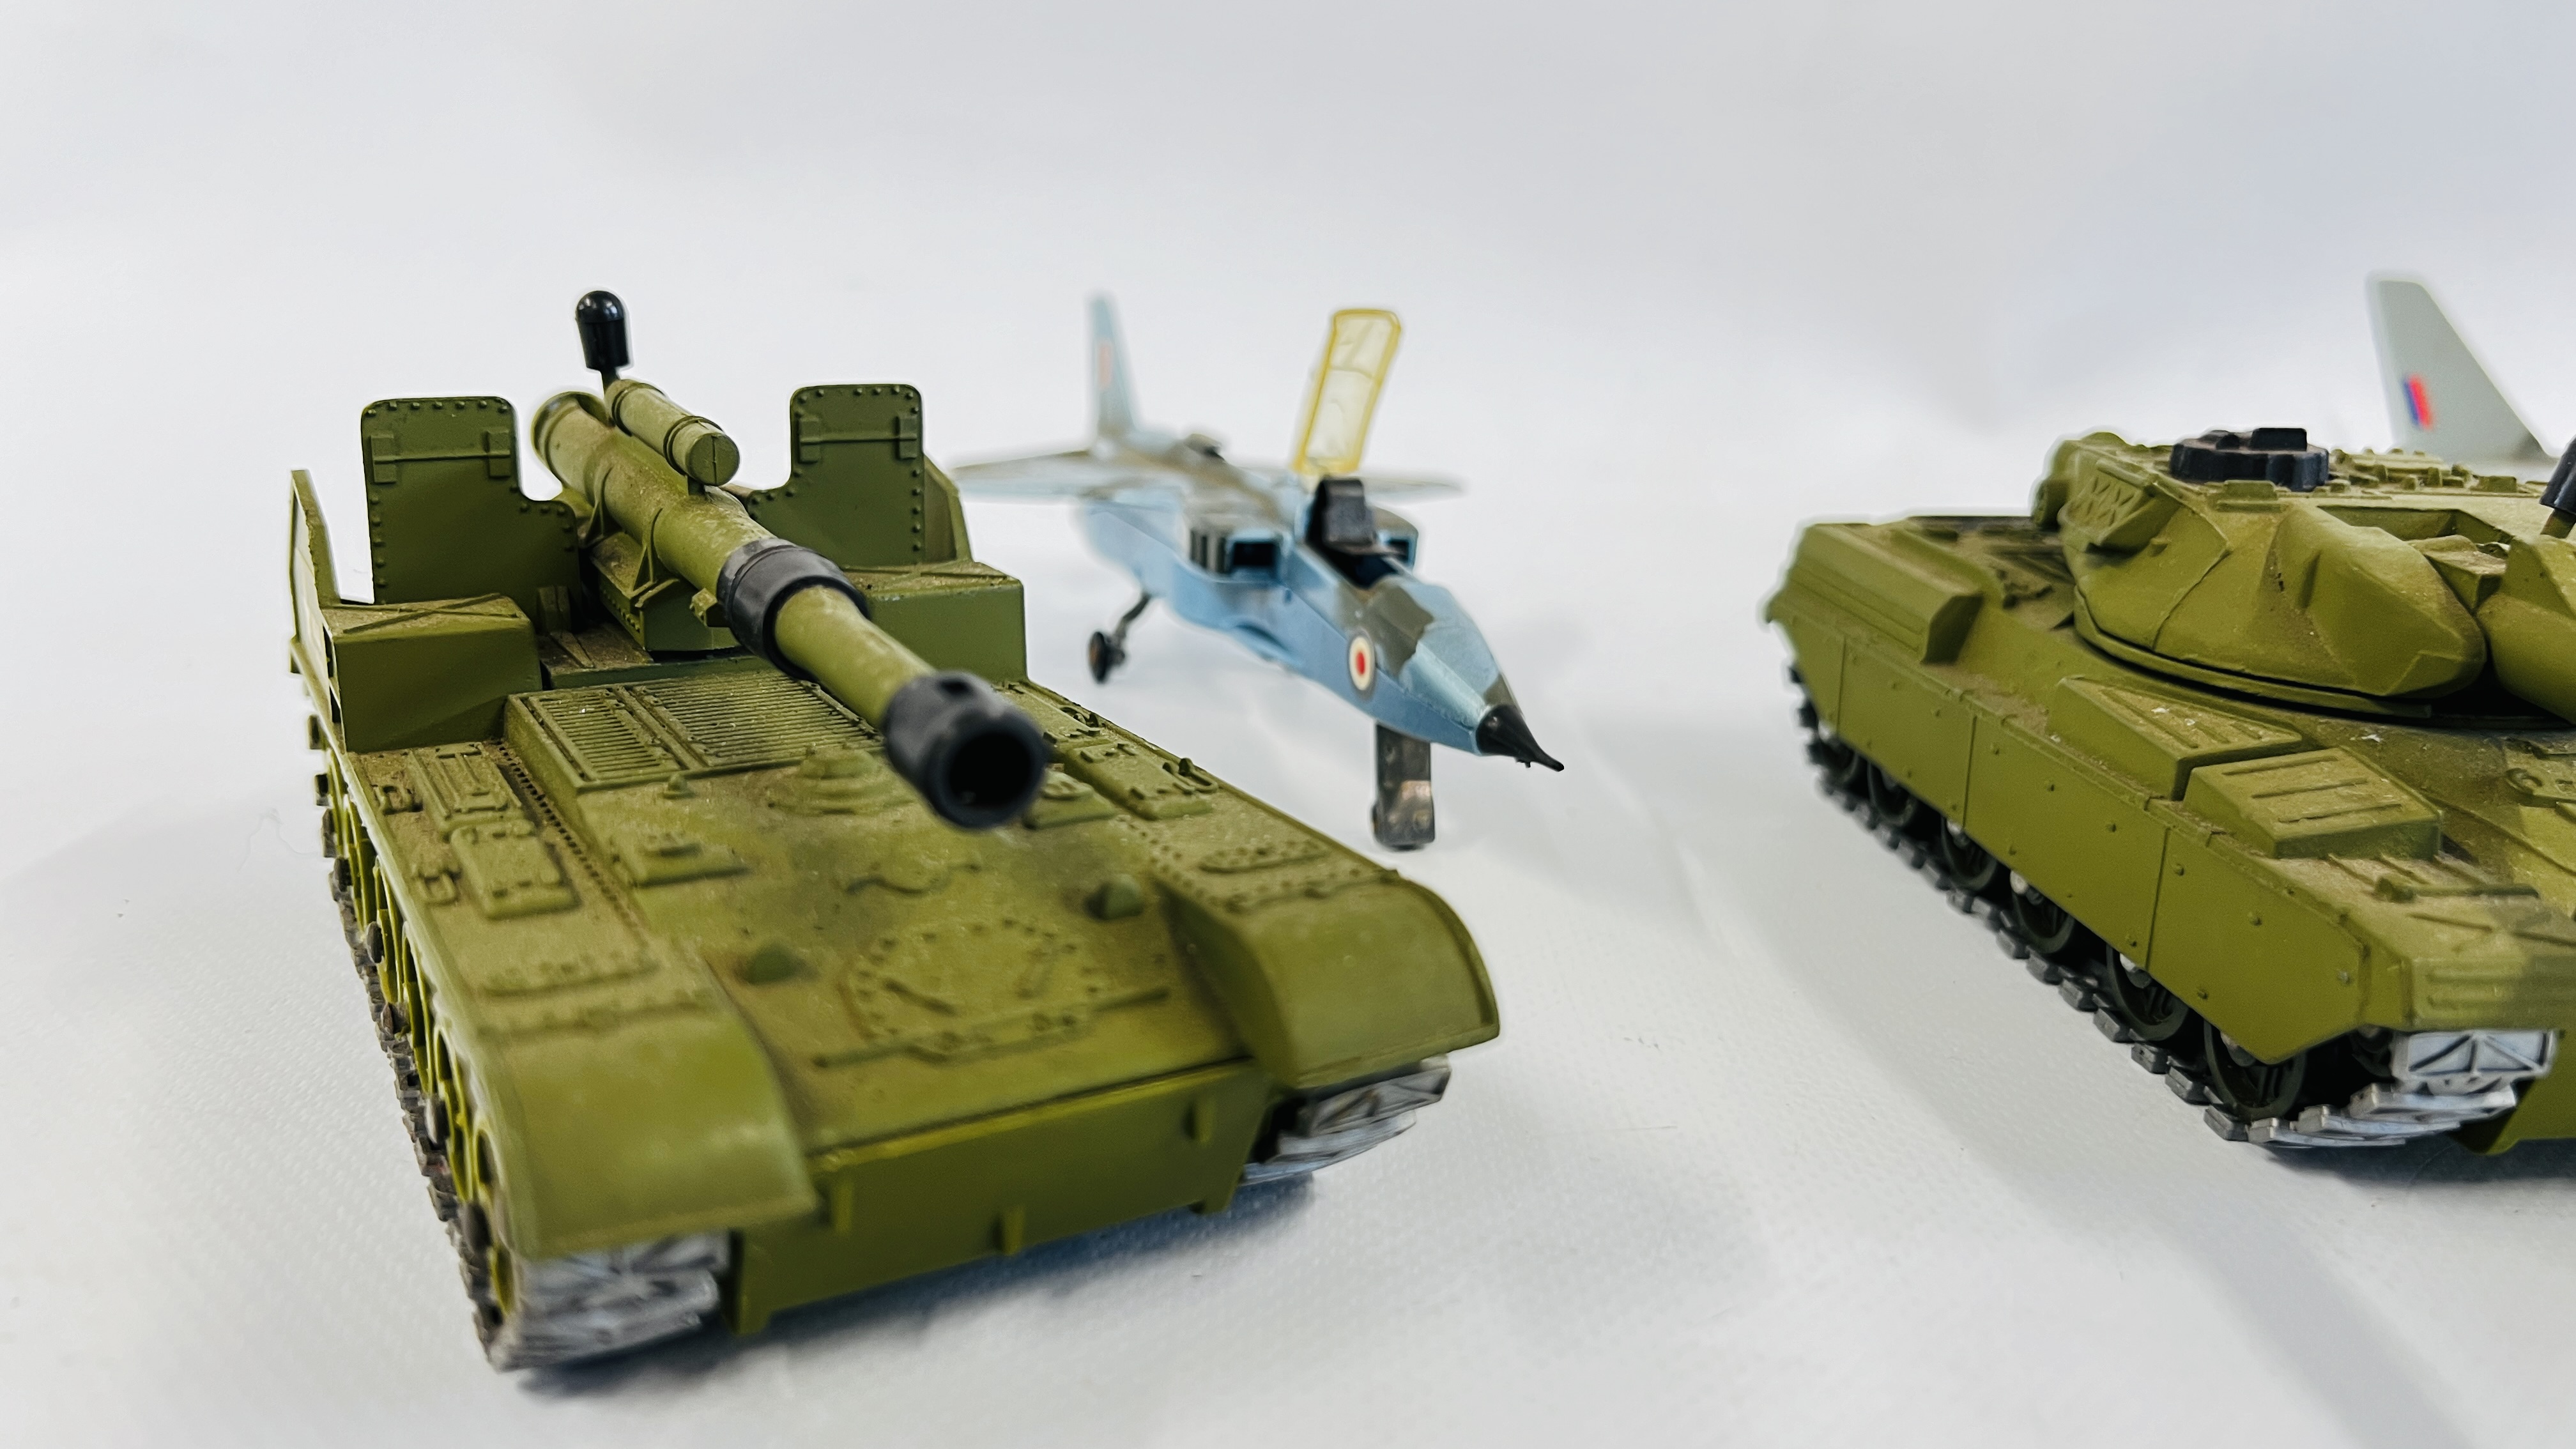 A GROUP OF 4 X DIE-CAST MILITARY DINKY TANKS ALONG WITH 4 X DIE-CAST DINKY FIGHTER PLANES / JETS. - Image 2 of 8